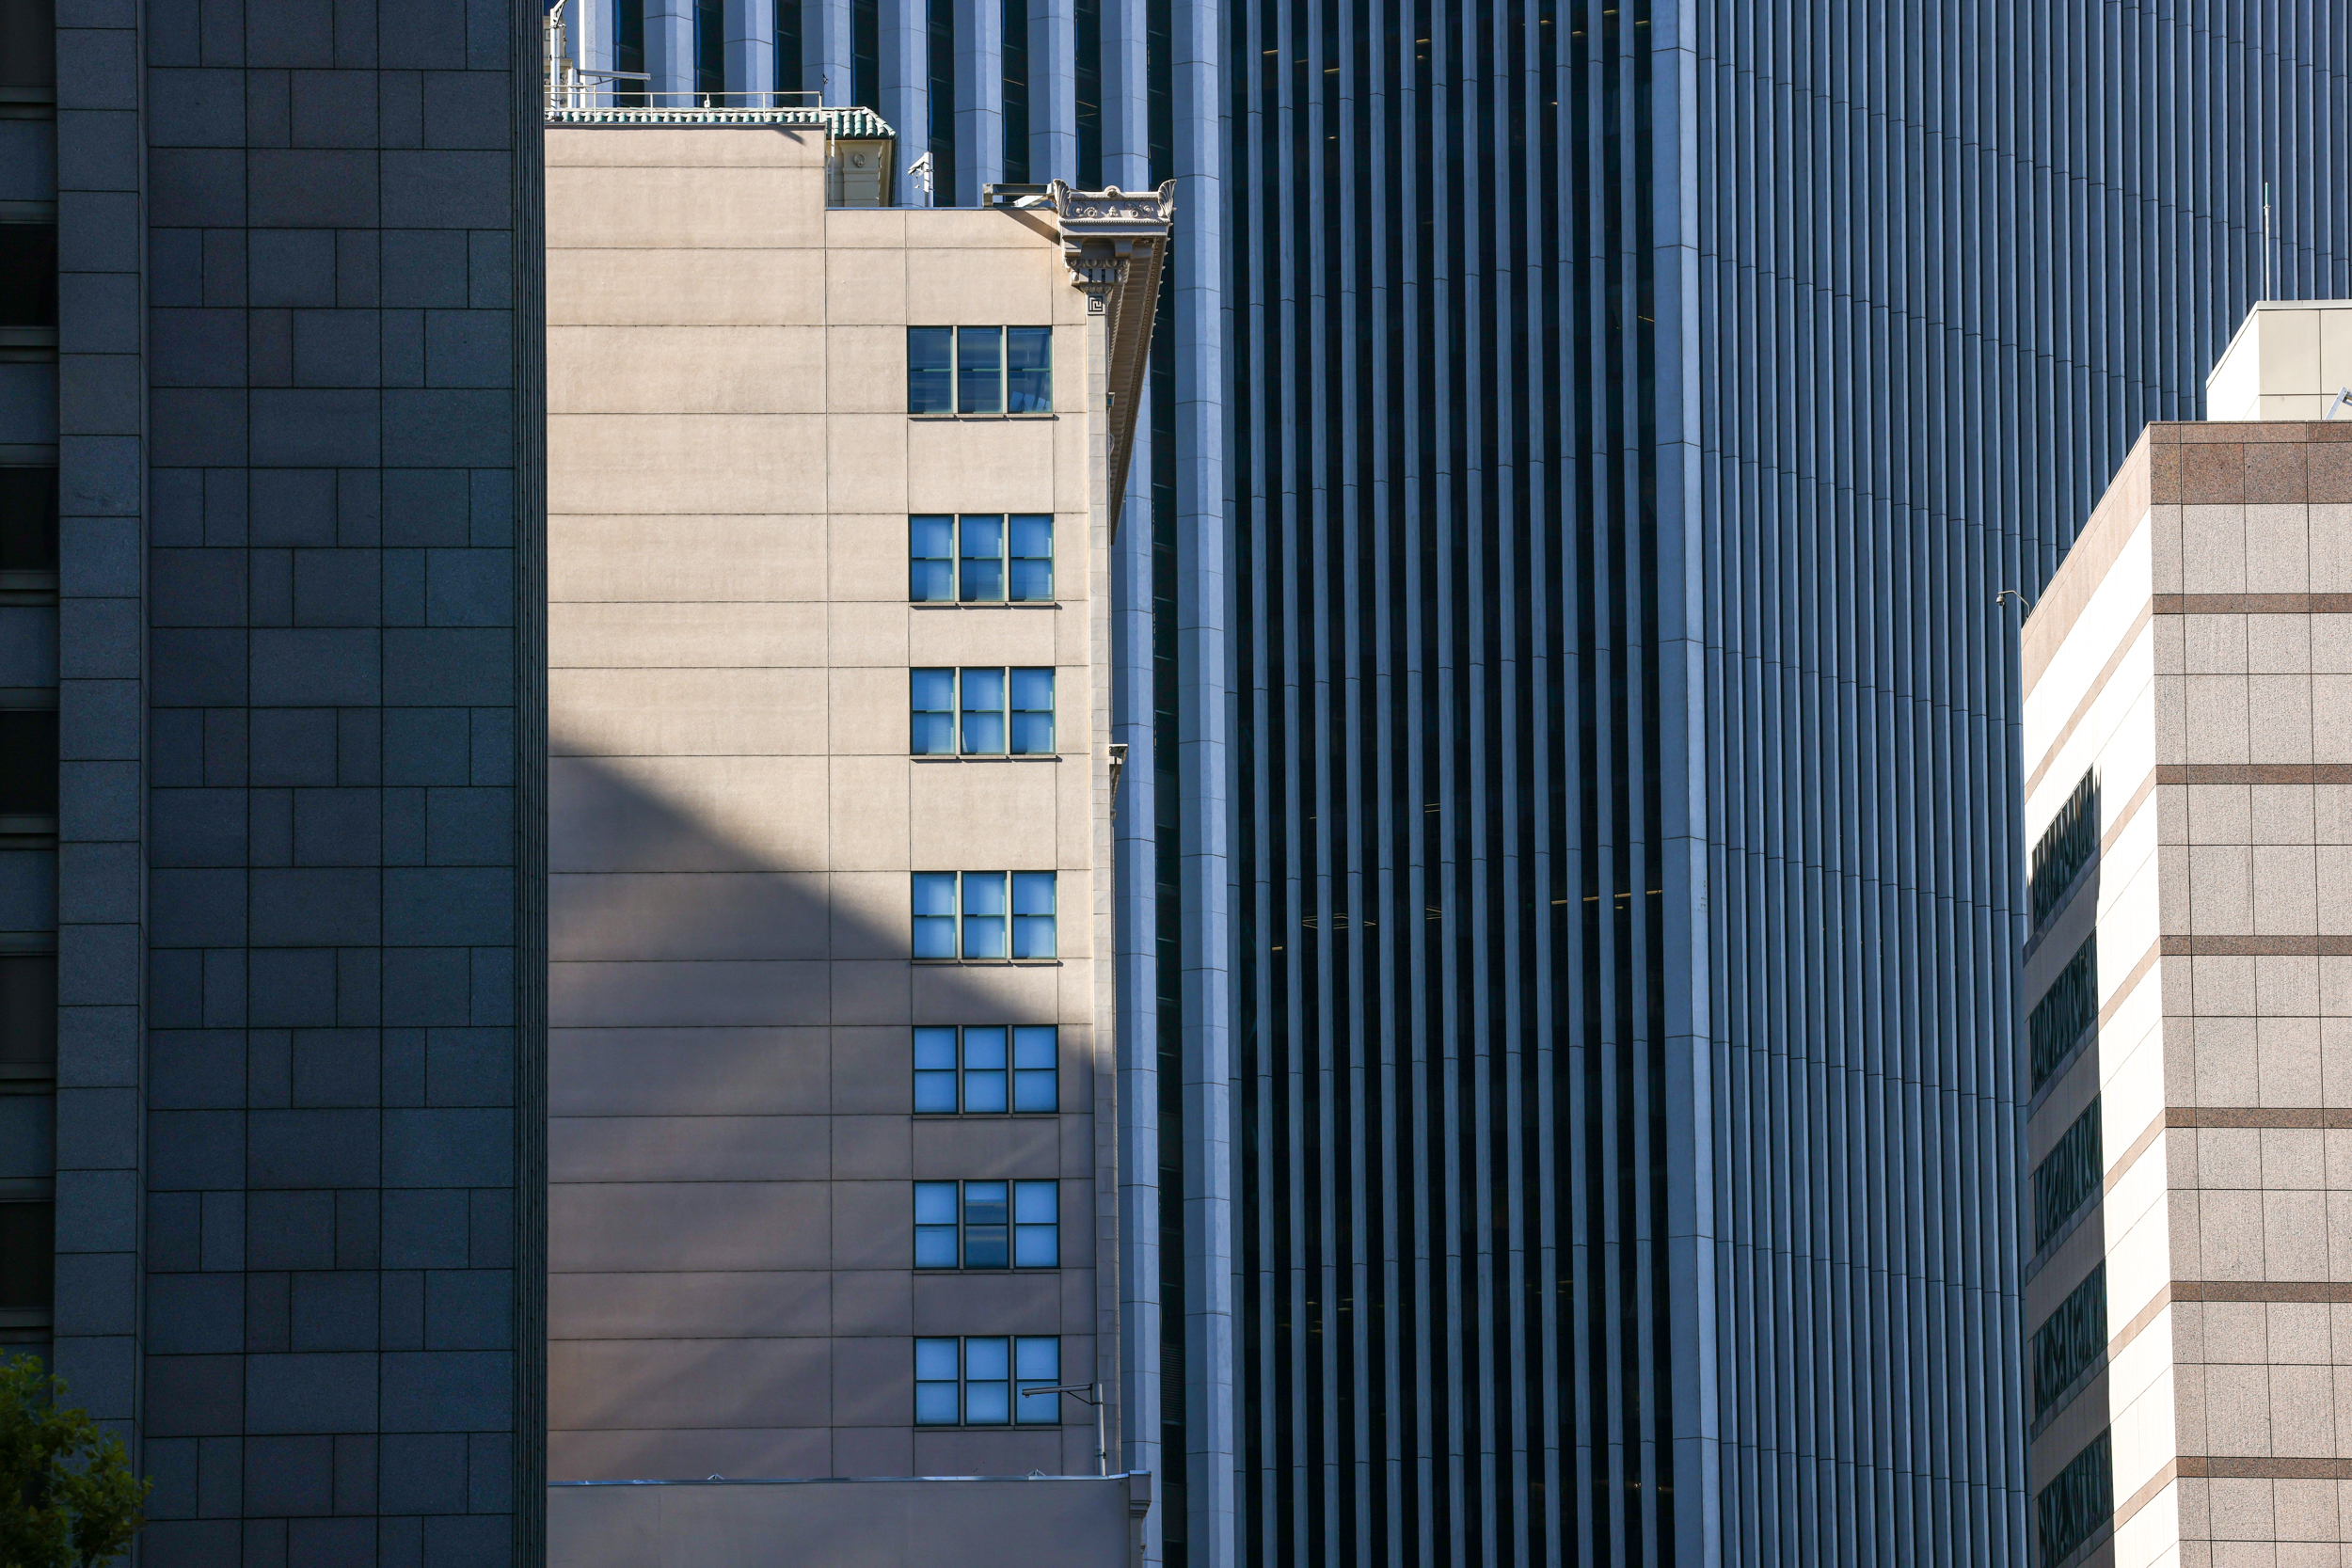 Facade of three different buildings with contrasting designs and a shadow dividing one.